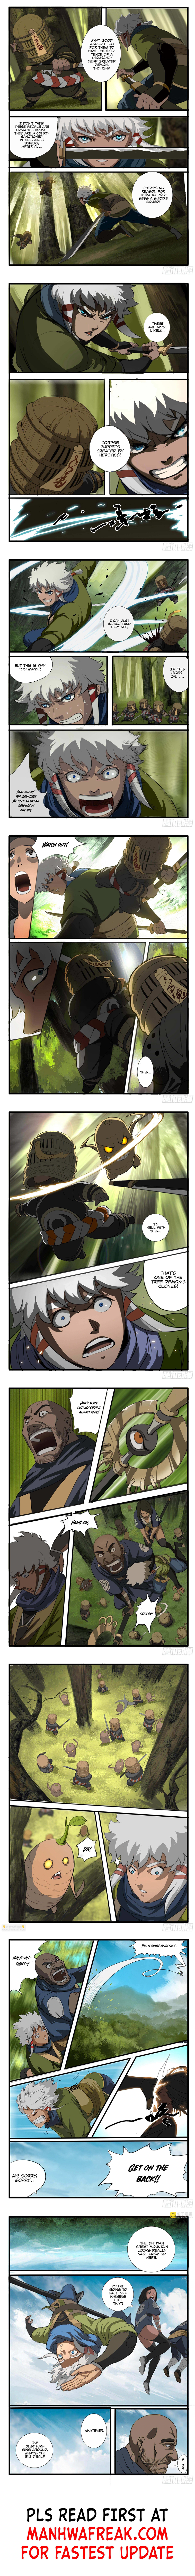 Record of the Kings Chapter 3 - page 2